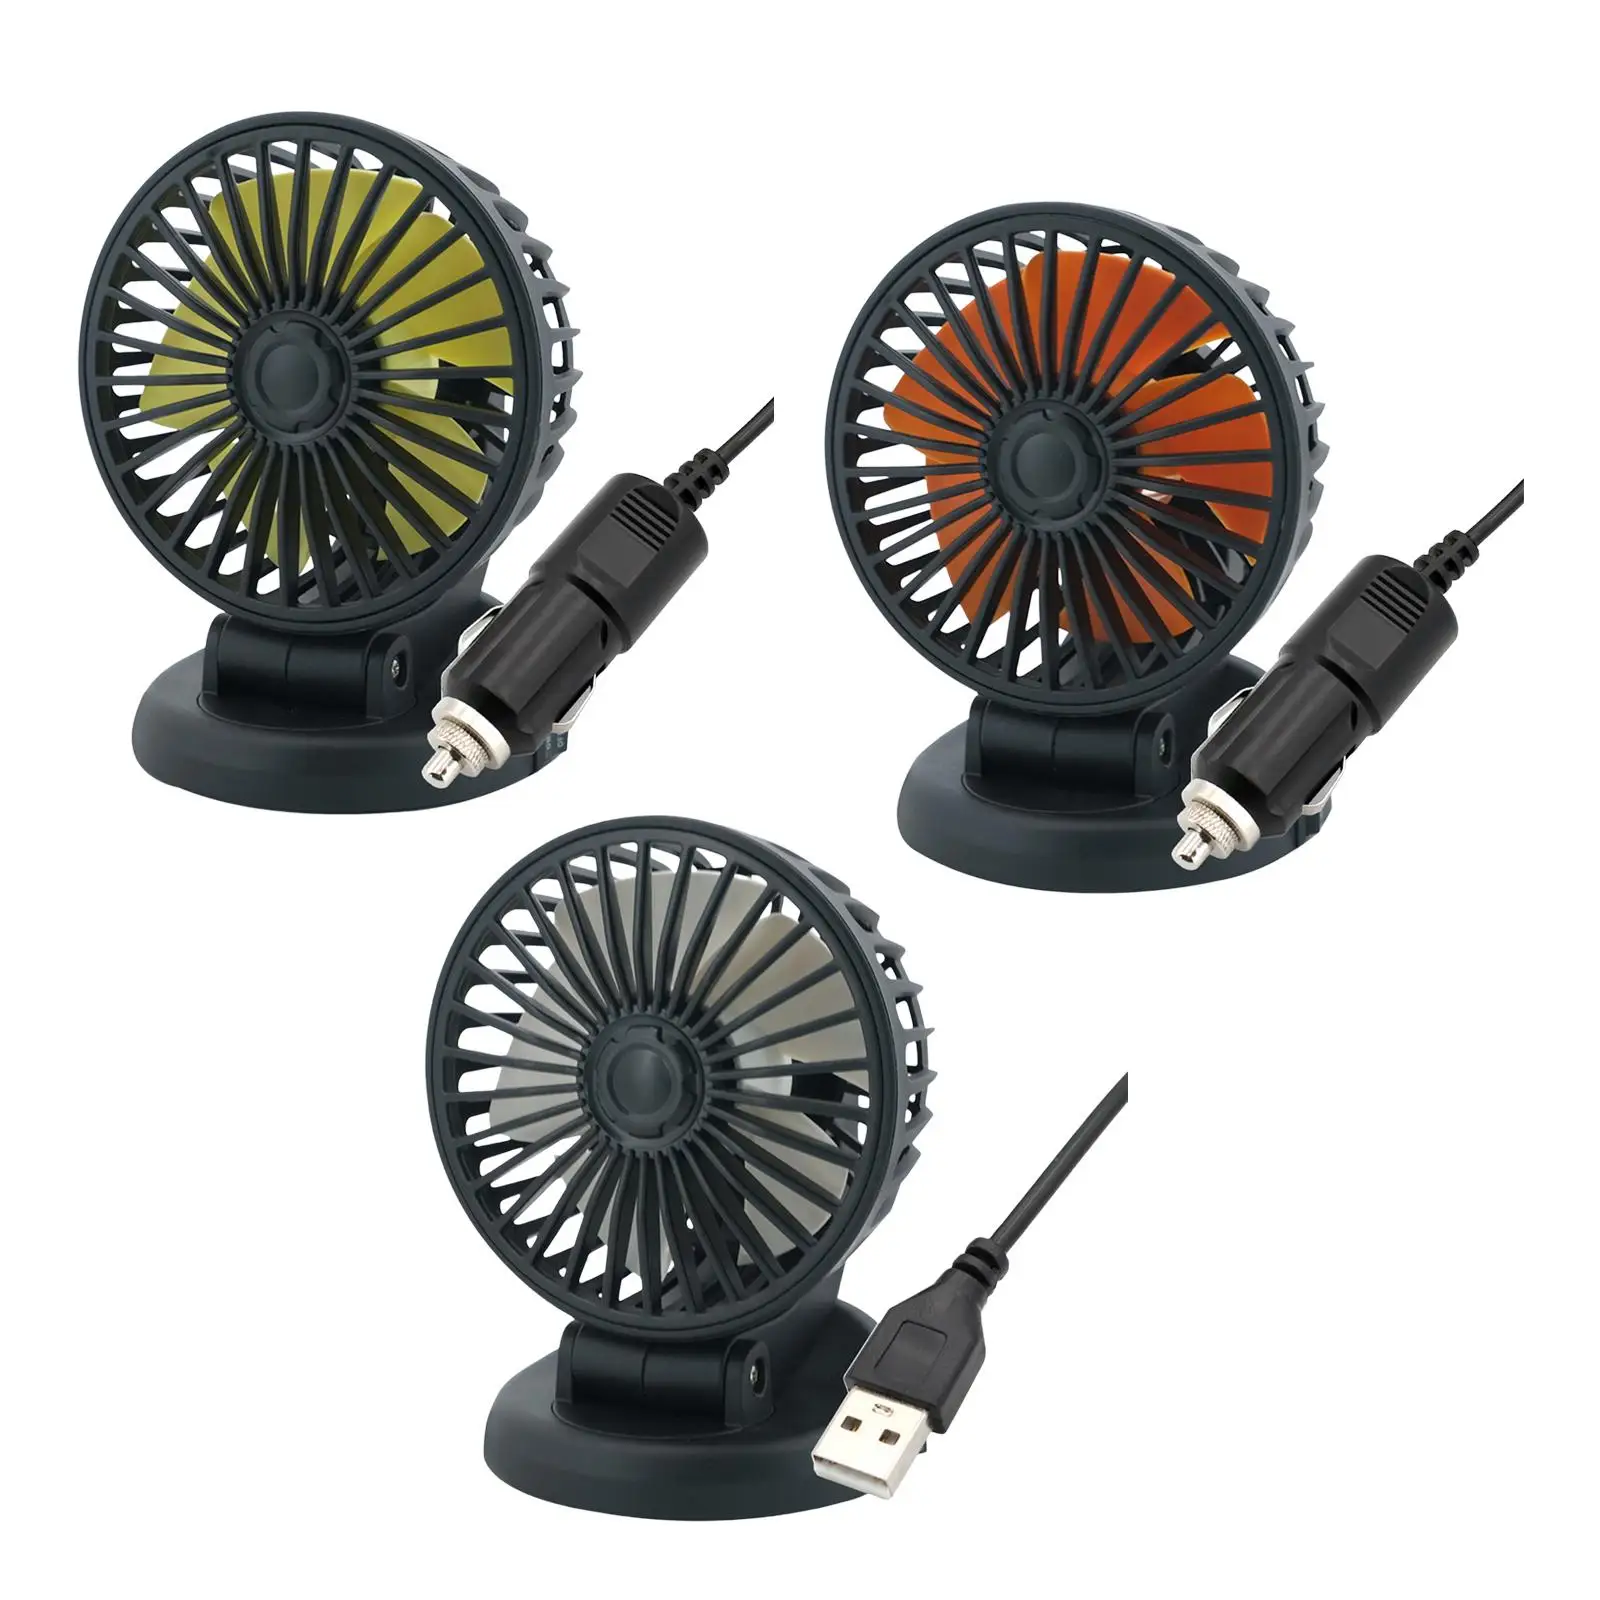 Rotatable Automobile Dashboard Fans 2 Speeds Adjustable Auto Cooler Fan Car Cooling Fan for Vehicle Boat Truck SUV RV